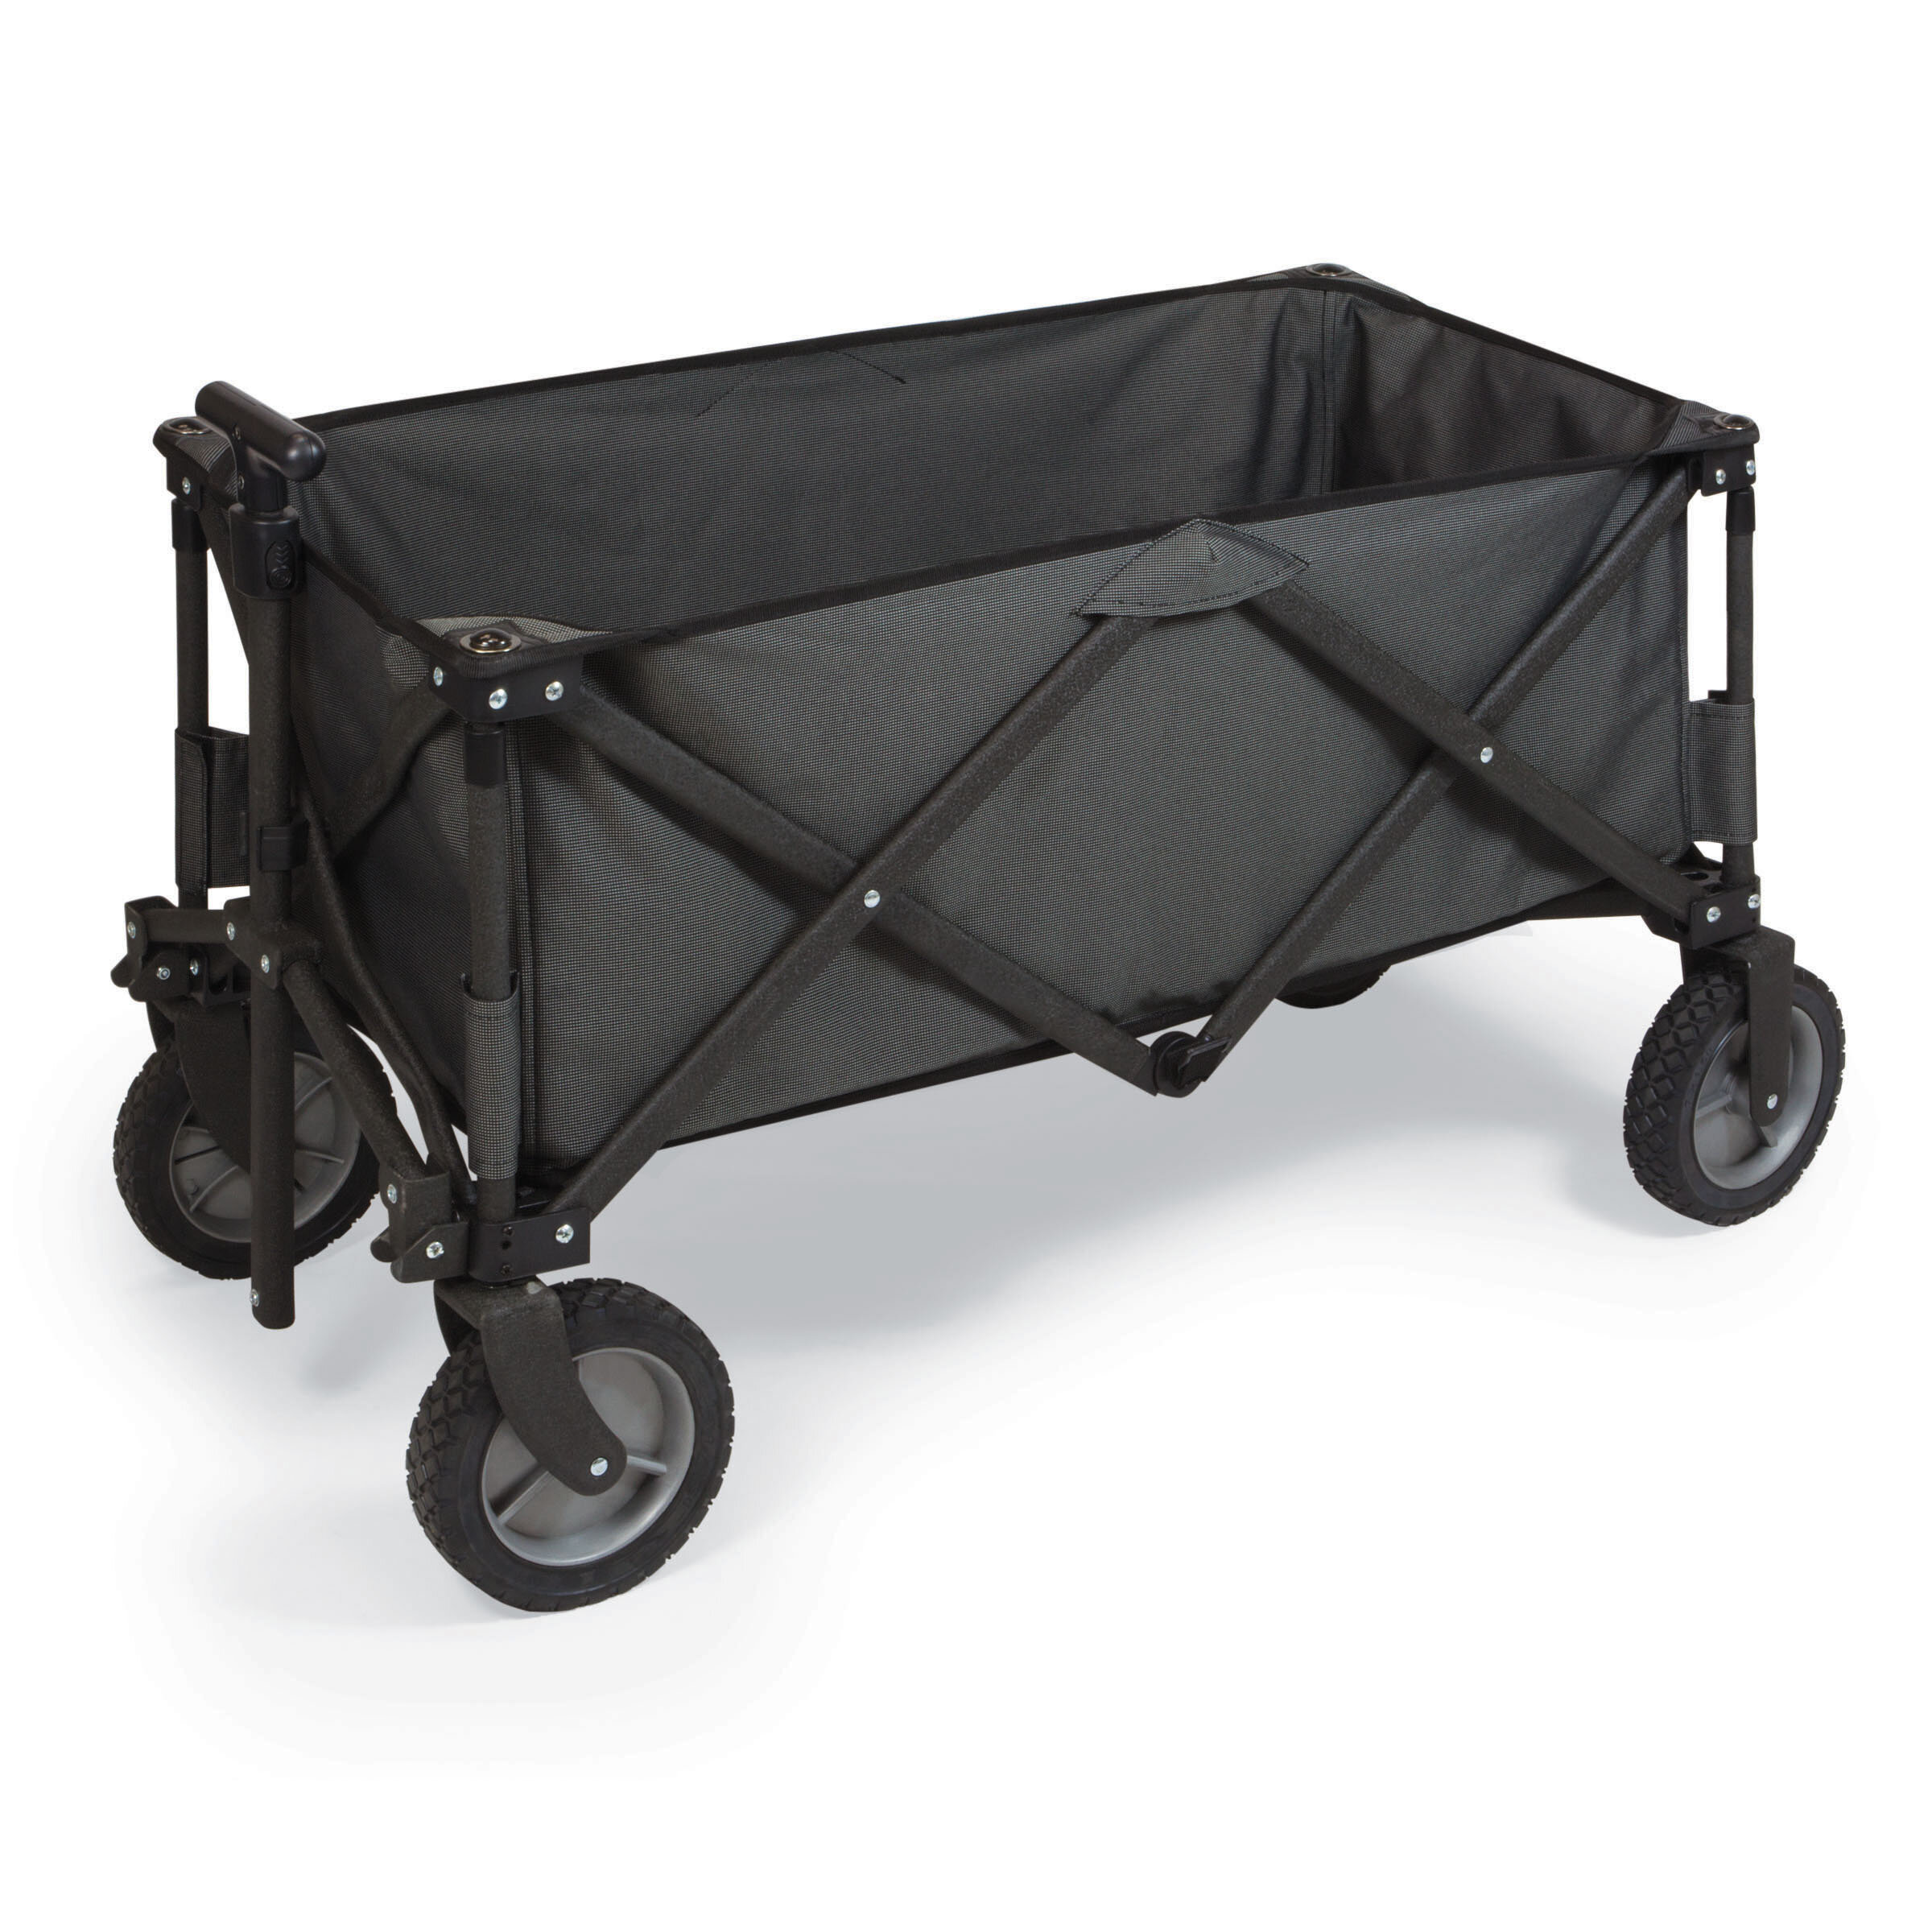 Folding Wagon Steel Frame Collapsible Utility Cart Safe Turn w/ Active Steering 